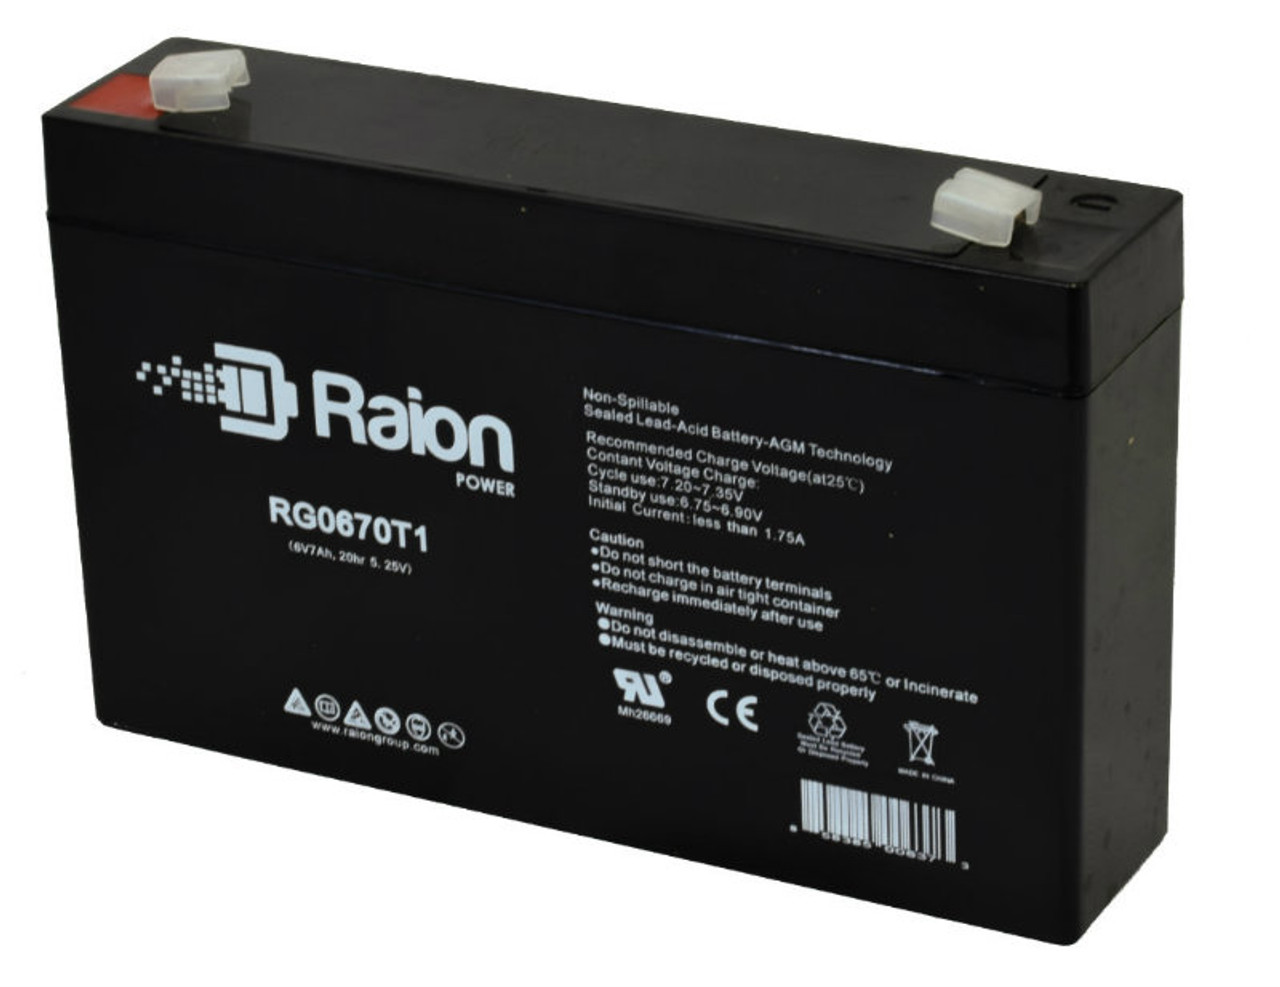 Raion Power RG0670T1 6V 7Ah Replacement Battery Cartridge for Ivy Biomedical Systems 702 Monitor Medical Equipment